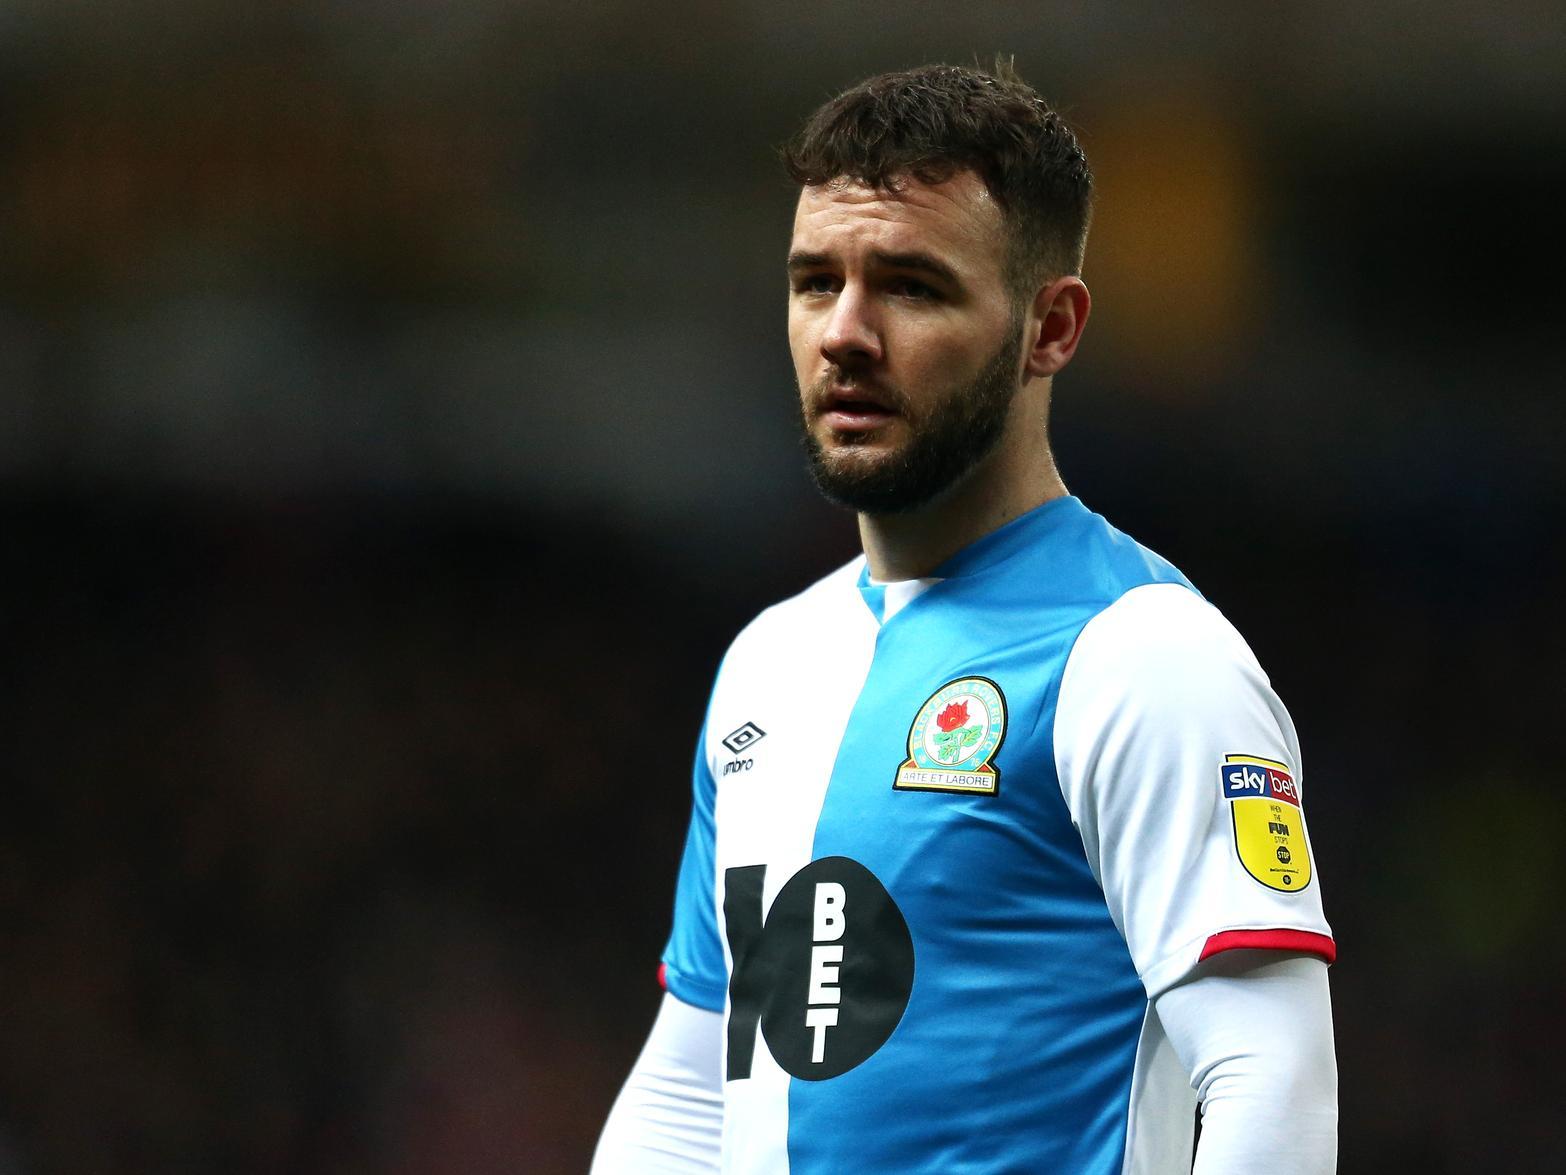 Rovers have been slightly inconsistent, but are capable of beating anyone on their day.